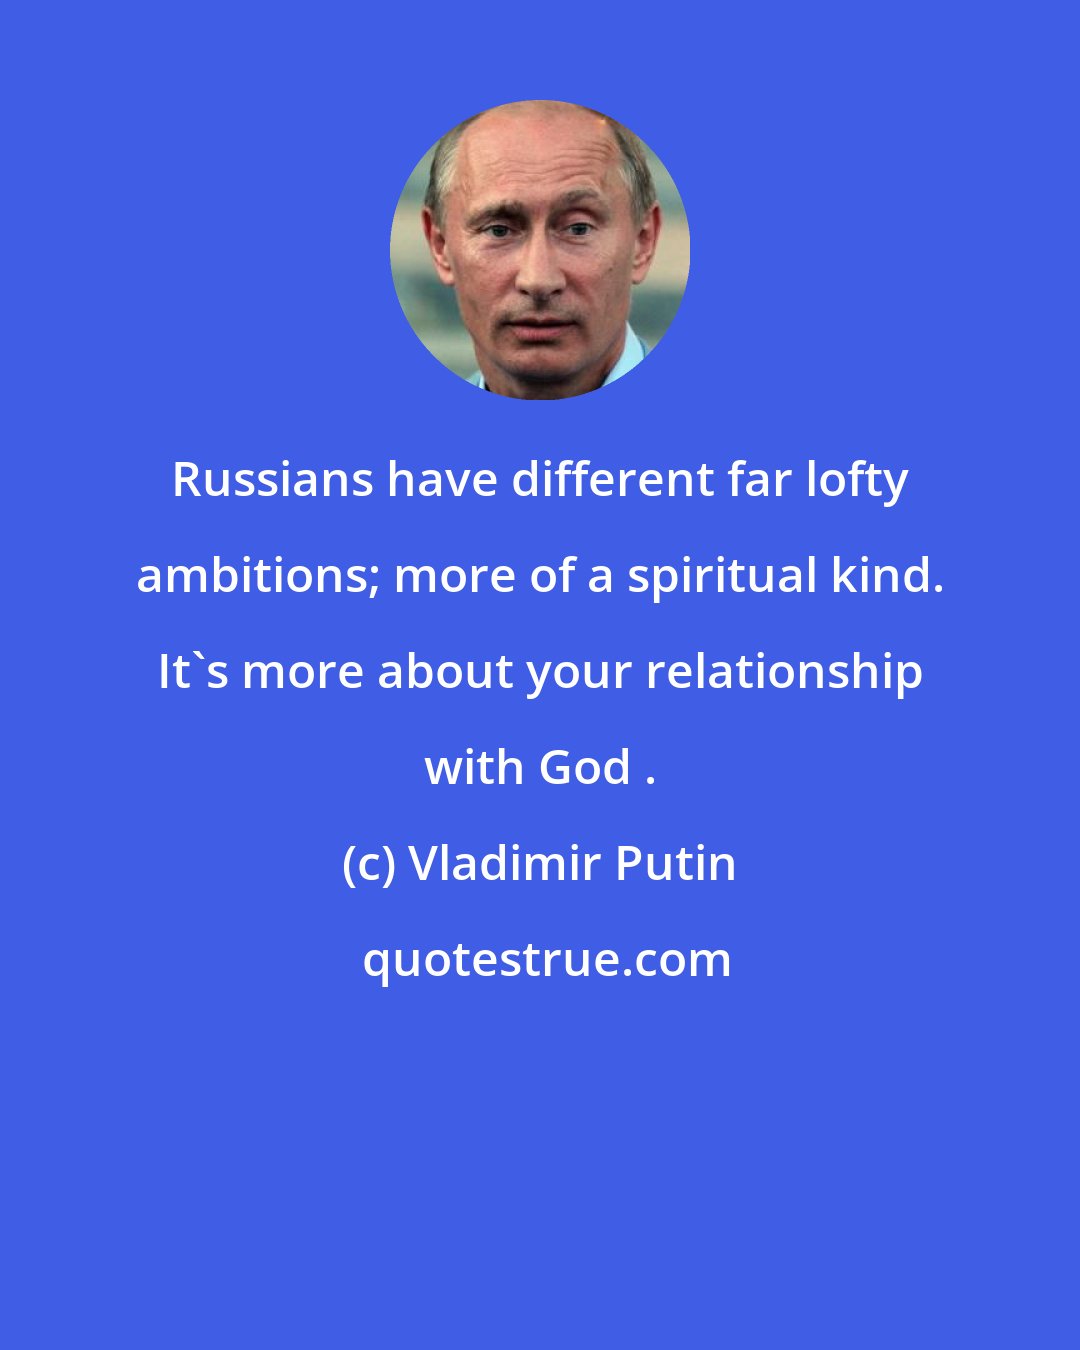 Vladimir Putin: Russians have different far lofty ambitions; more of a spiritual kind. It's more about your relationship with God .